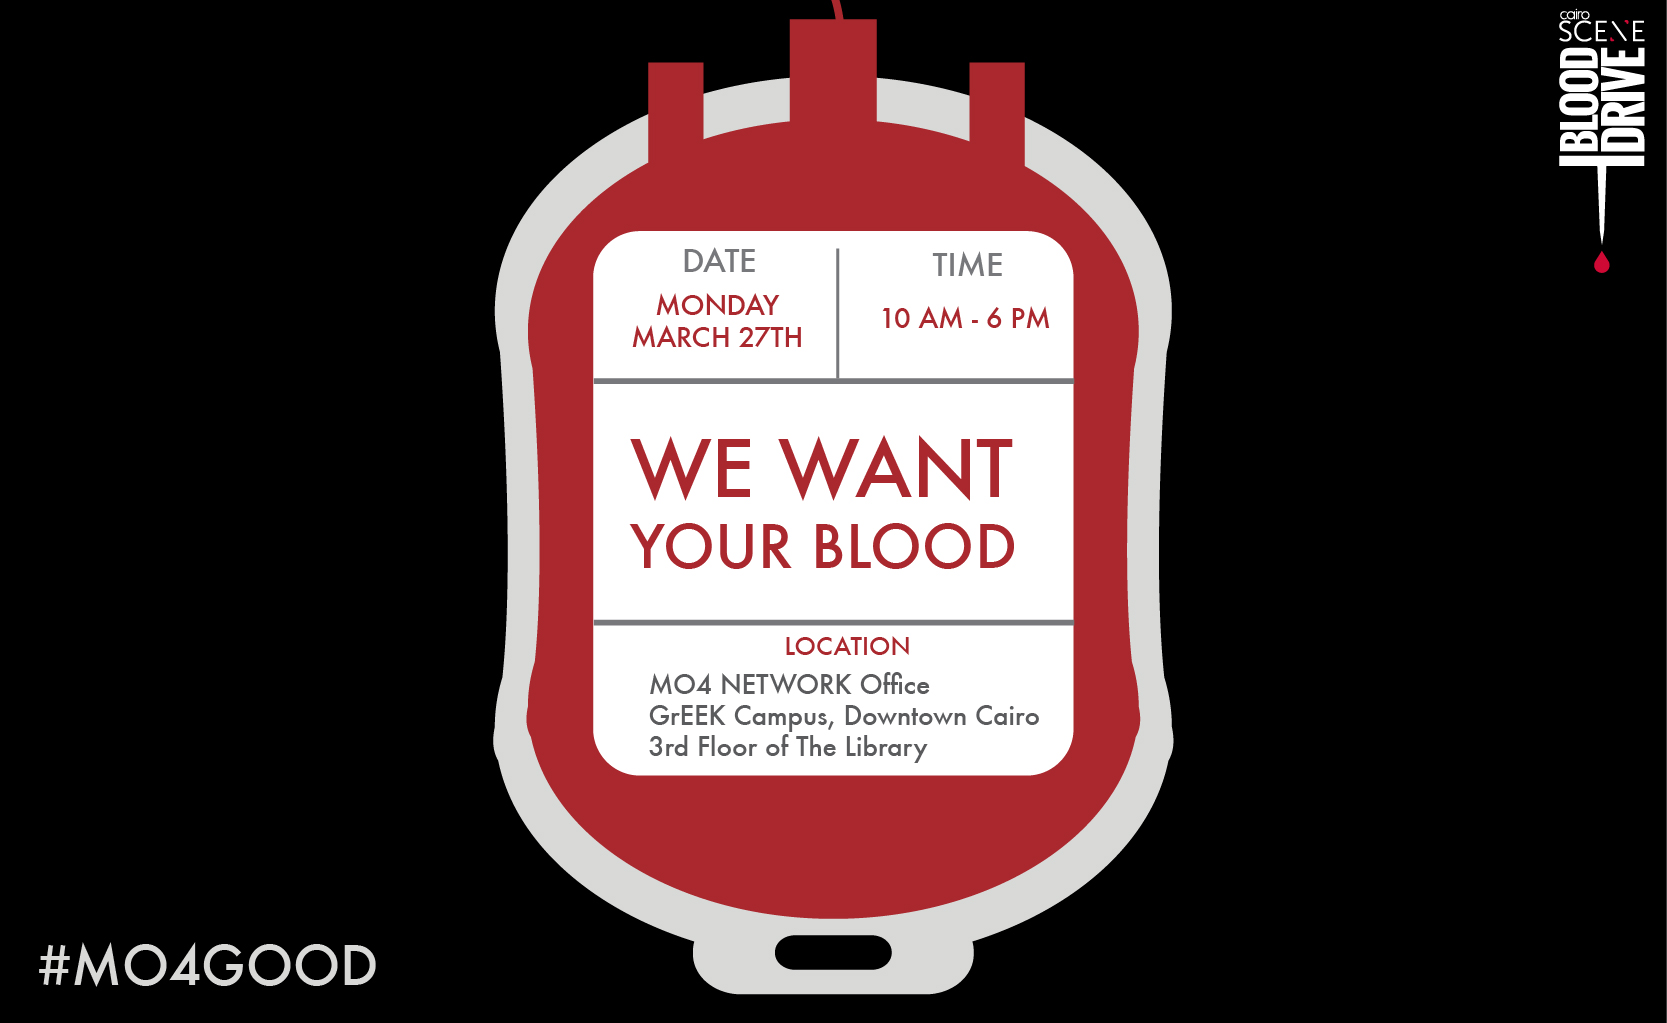 We're Hosting Our 2nd Blood Drive Next Monday and If You Join Us You Could Actually Save Lives